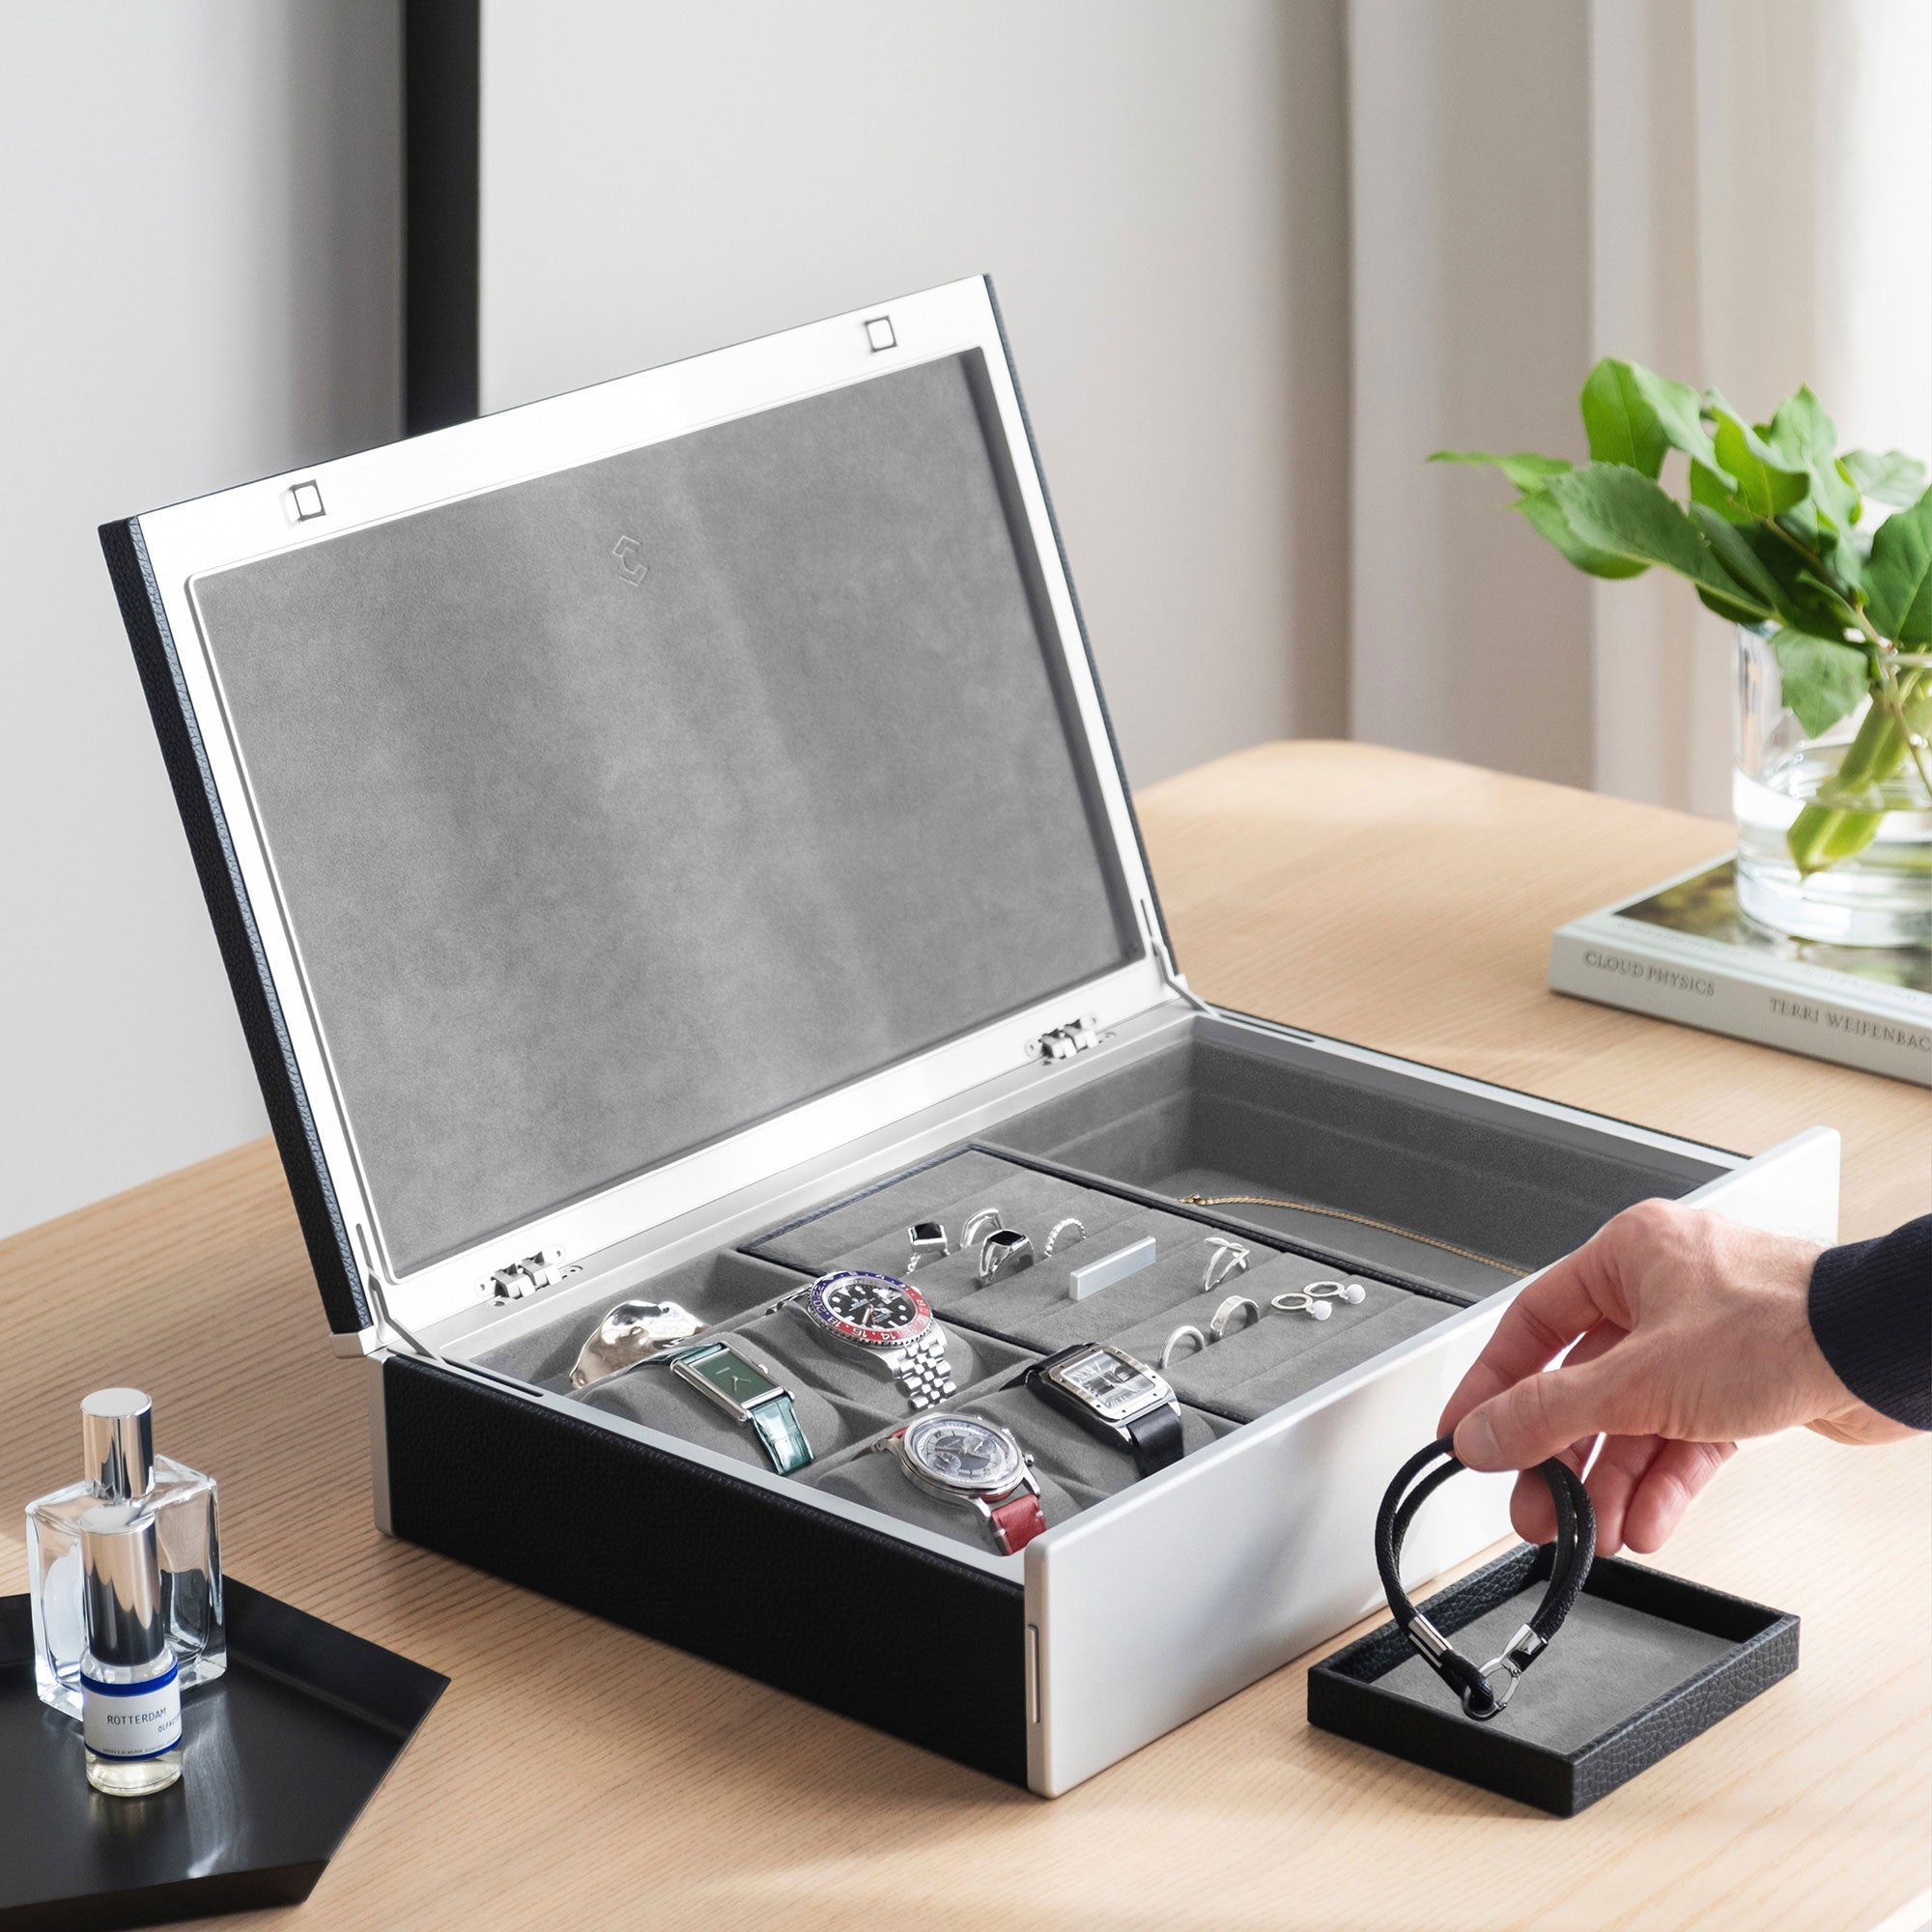 Lifestyle photo of man taking bracelet from removable jewelry tray from the black leather and fog grey interior Taylor 4 Watch and Jewelry box. The box is holding 4 watches and fine jewelry, including silver and gold rings and a necklace in a modern apartment setting.